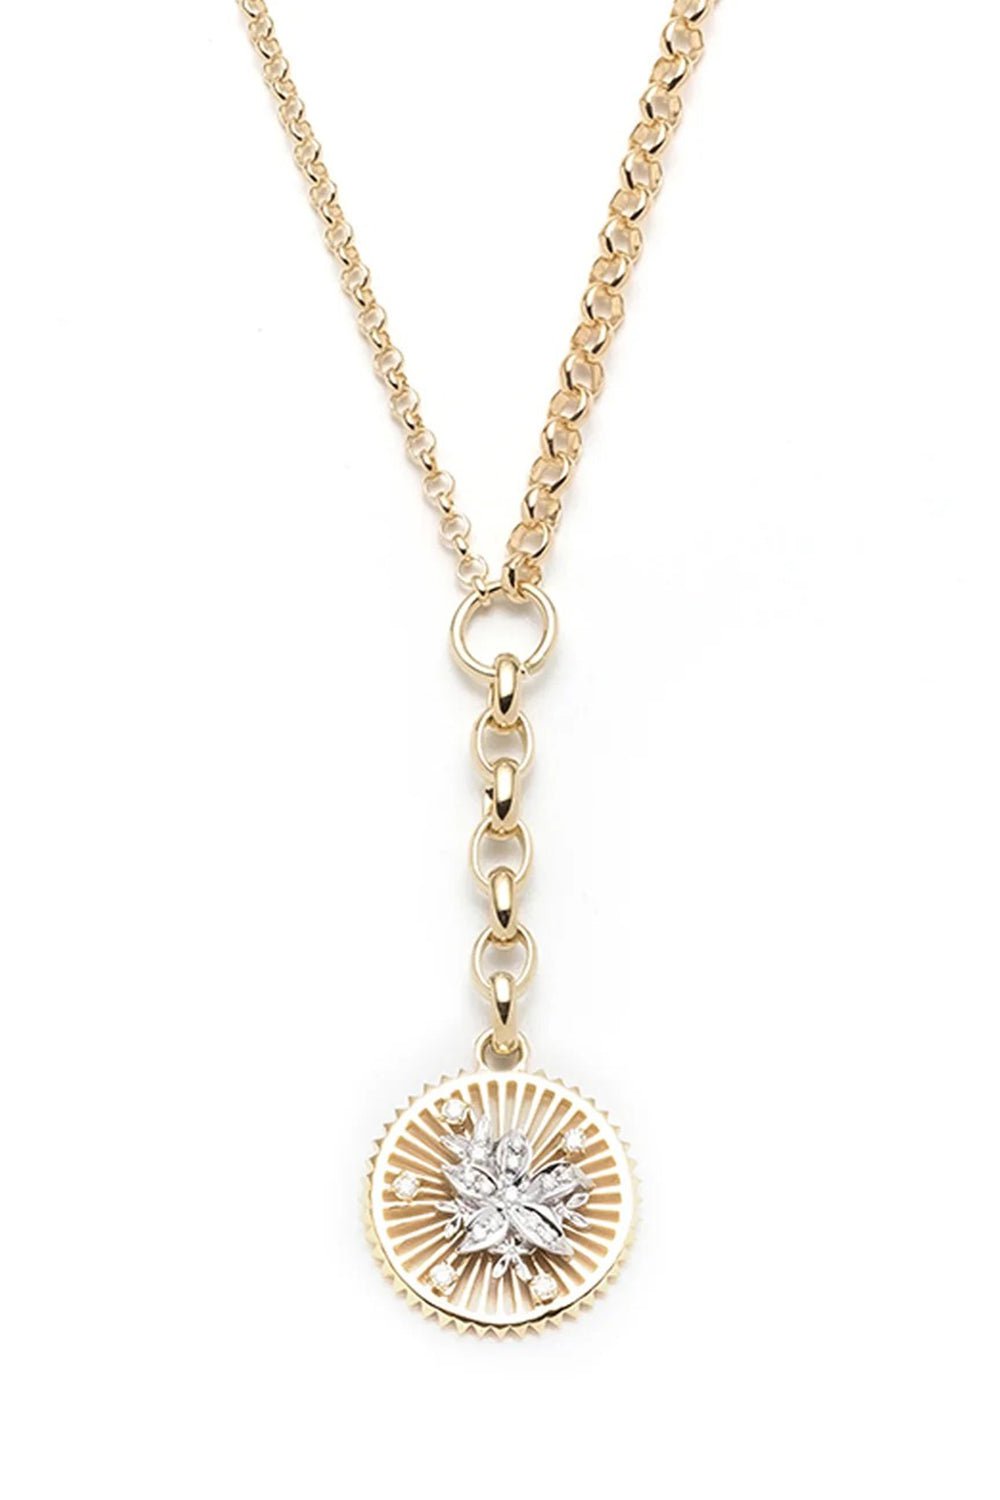 FOUNDRAE-Resilience Medallion Belcher Necklace-YELLOW GOLD